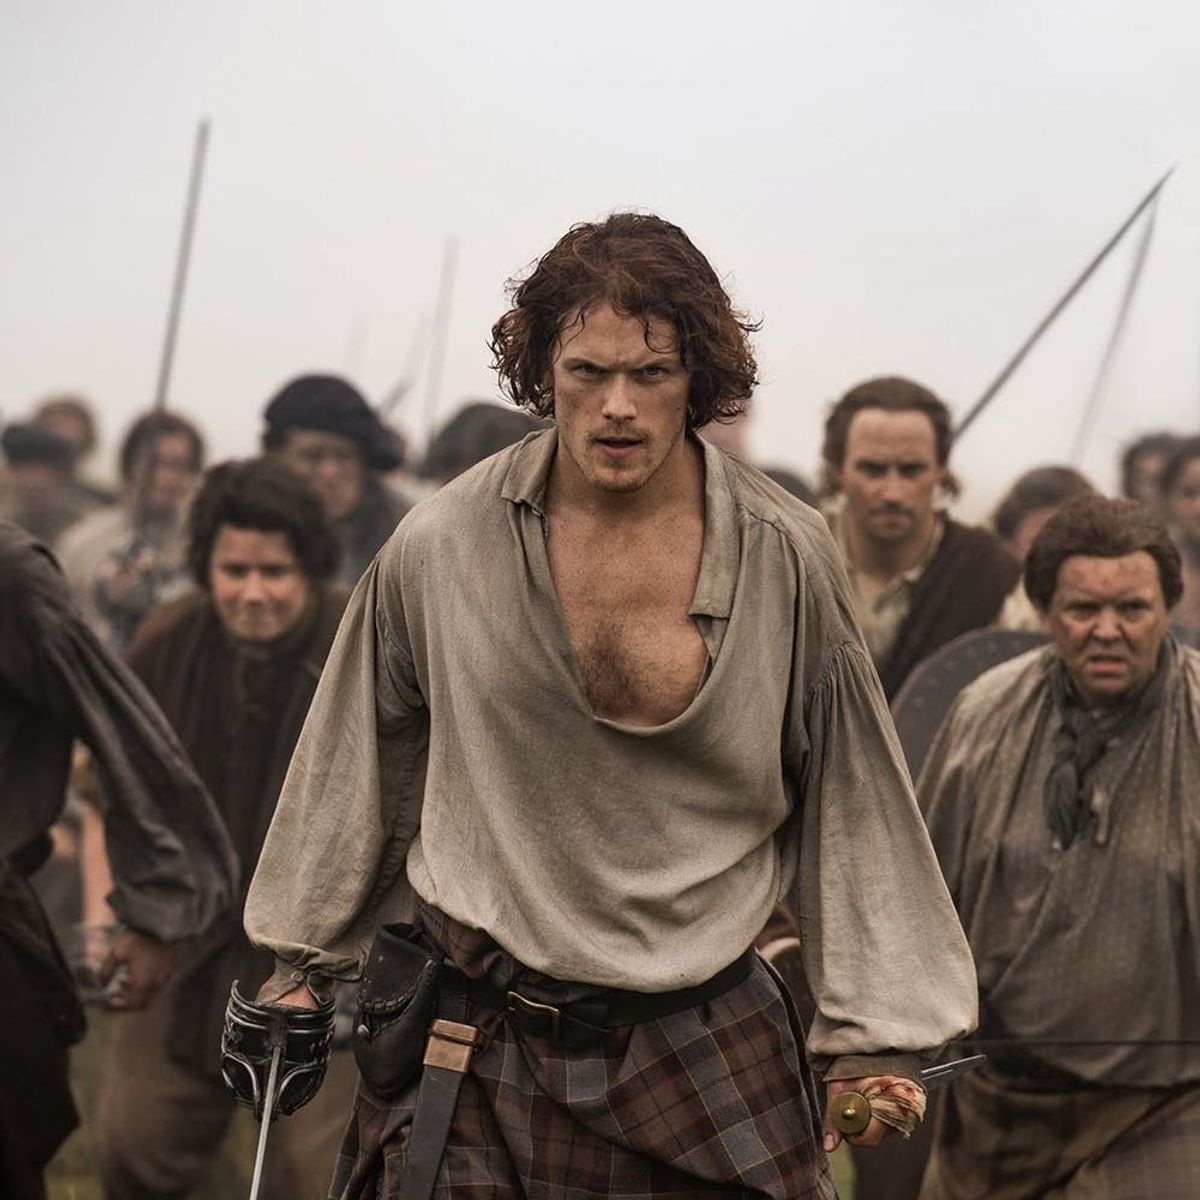 “Outlander” Season 3 Takes Its Time Reuniting Claire and Jamie